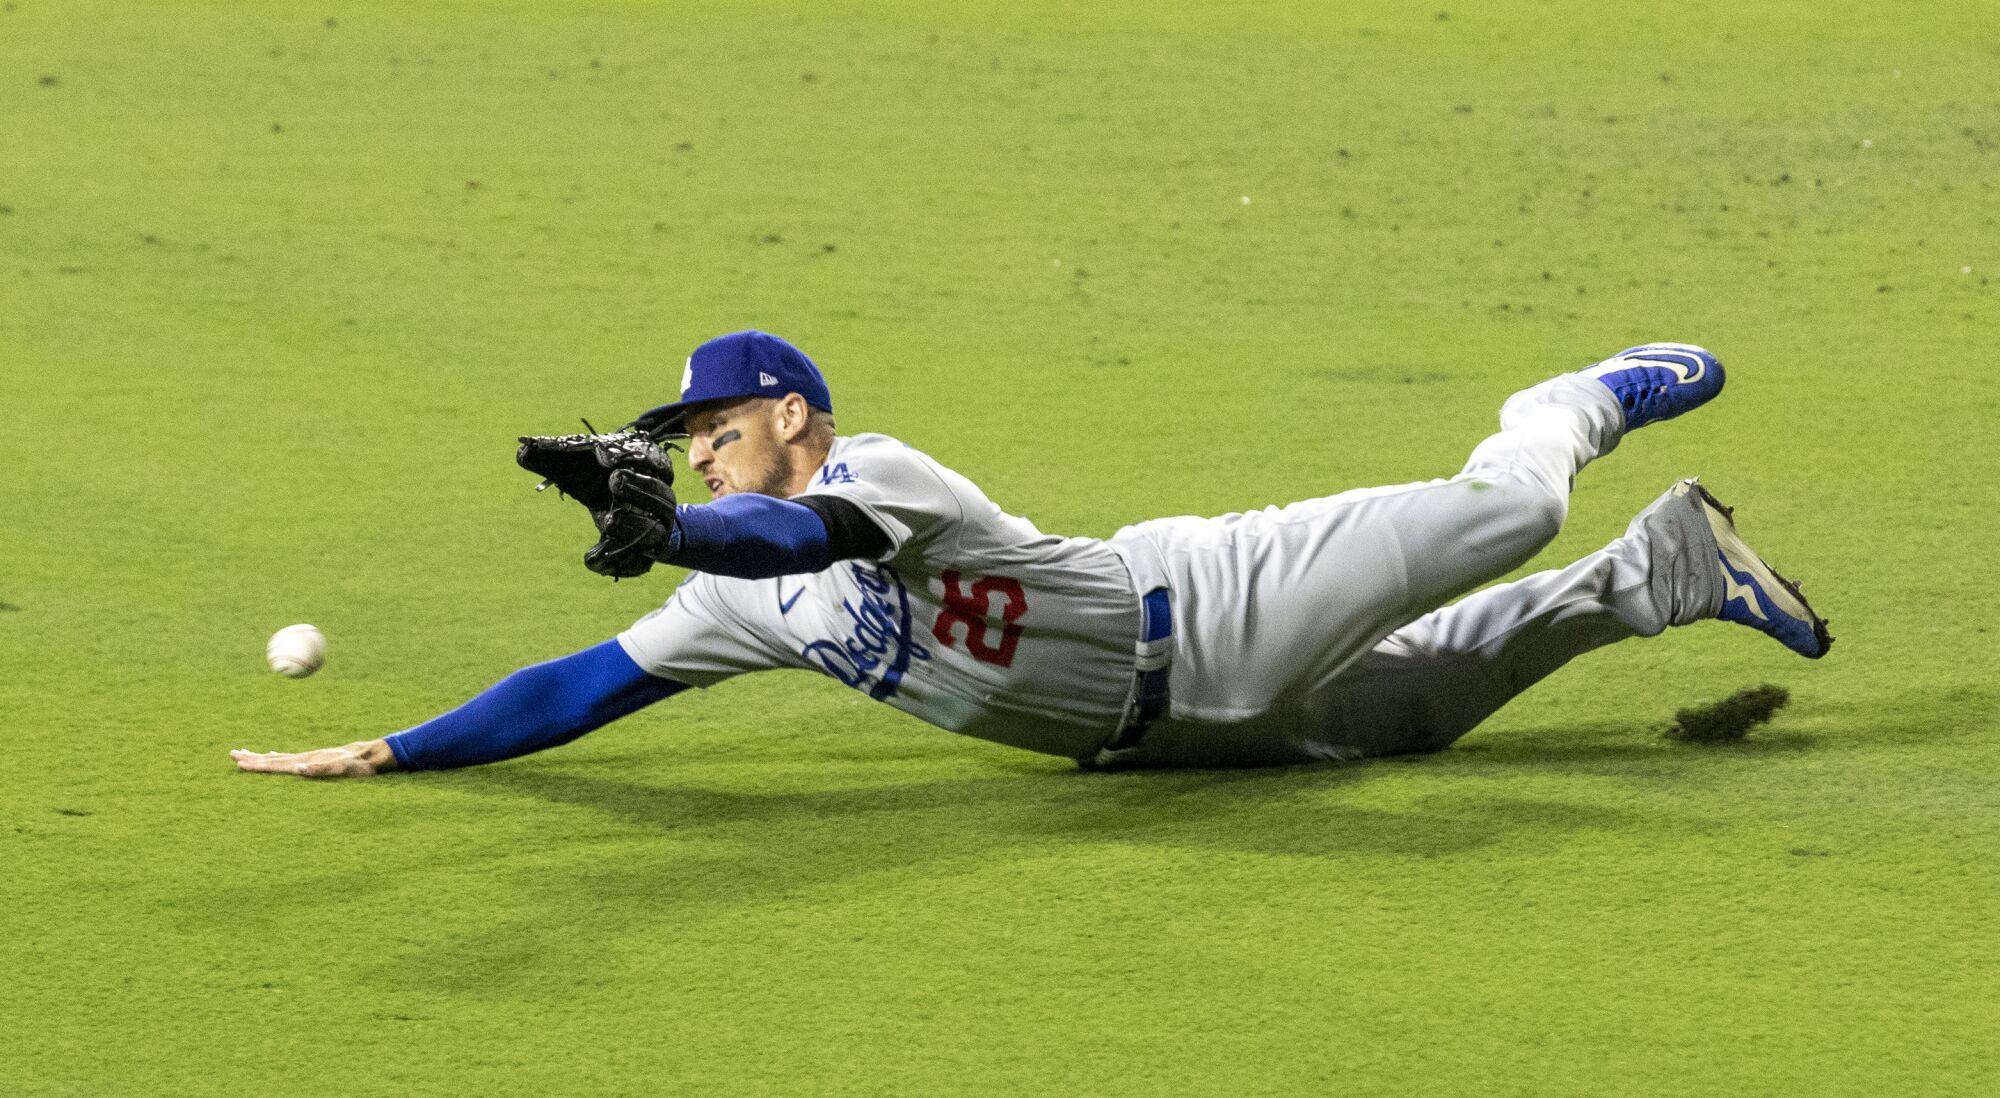 Dodgers center fielder Trayce Thompson dives for a liner.